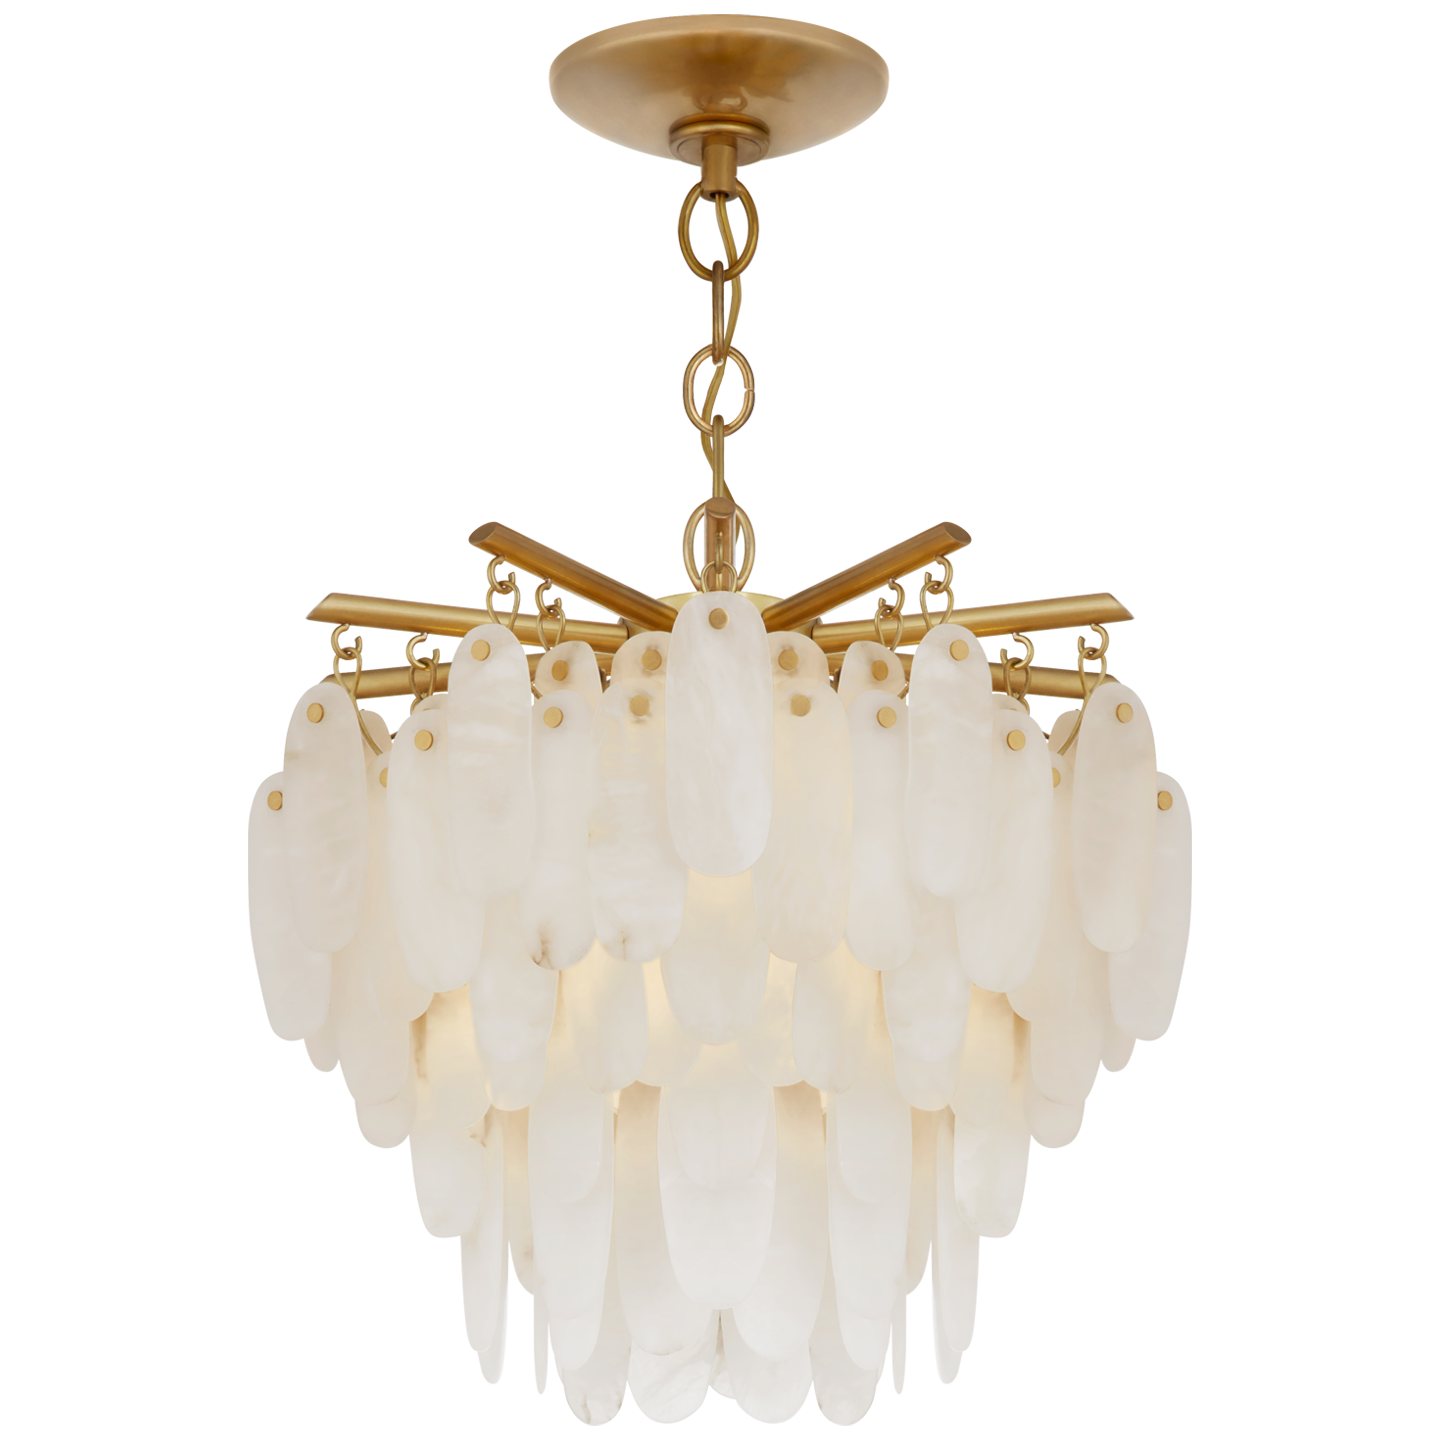 This Cora Medium Semi-Flush Mount from Visual Comfort is art in the form of lighting with its antique-burnished brass finish and hanging alabaster pieces. Sure to be an absolutely head-turner in any entryway, living room, or other large area  Designer: Chapman & Myers